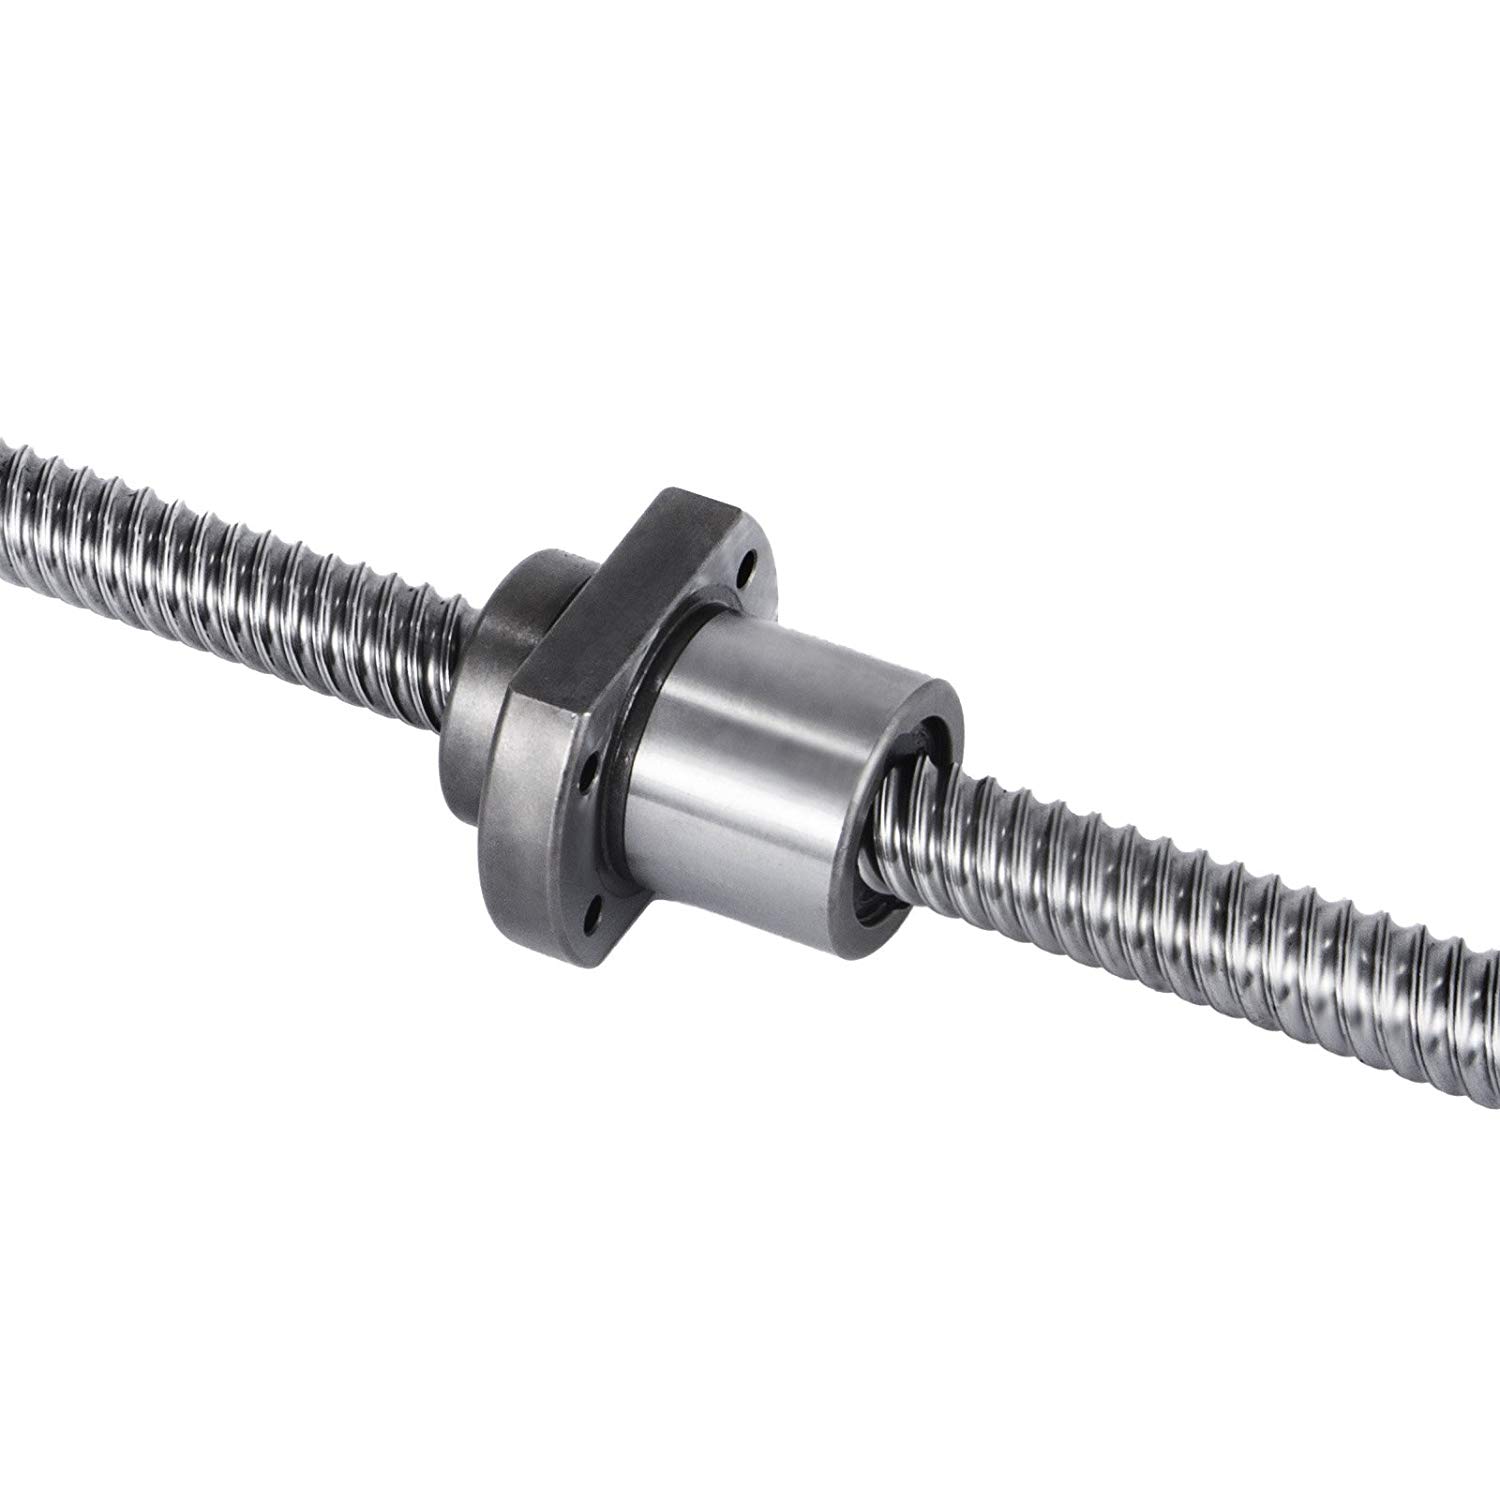 Details about   Free shipping anti backlash ball screw 1605 SFU1605 ball screw supporter bk12b 